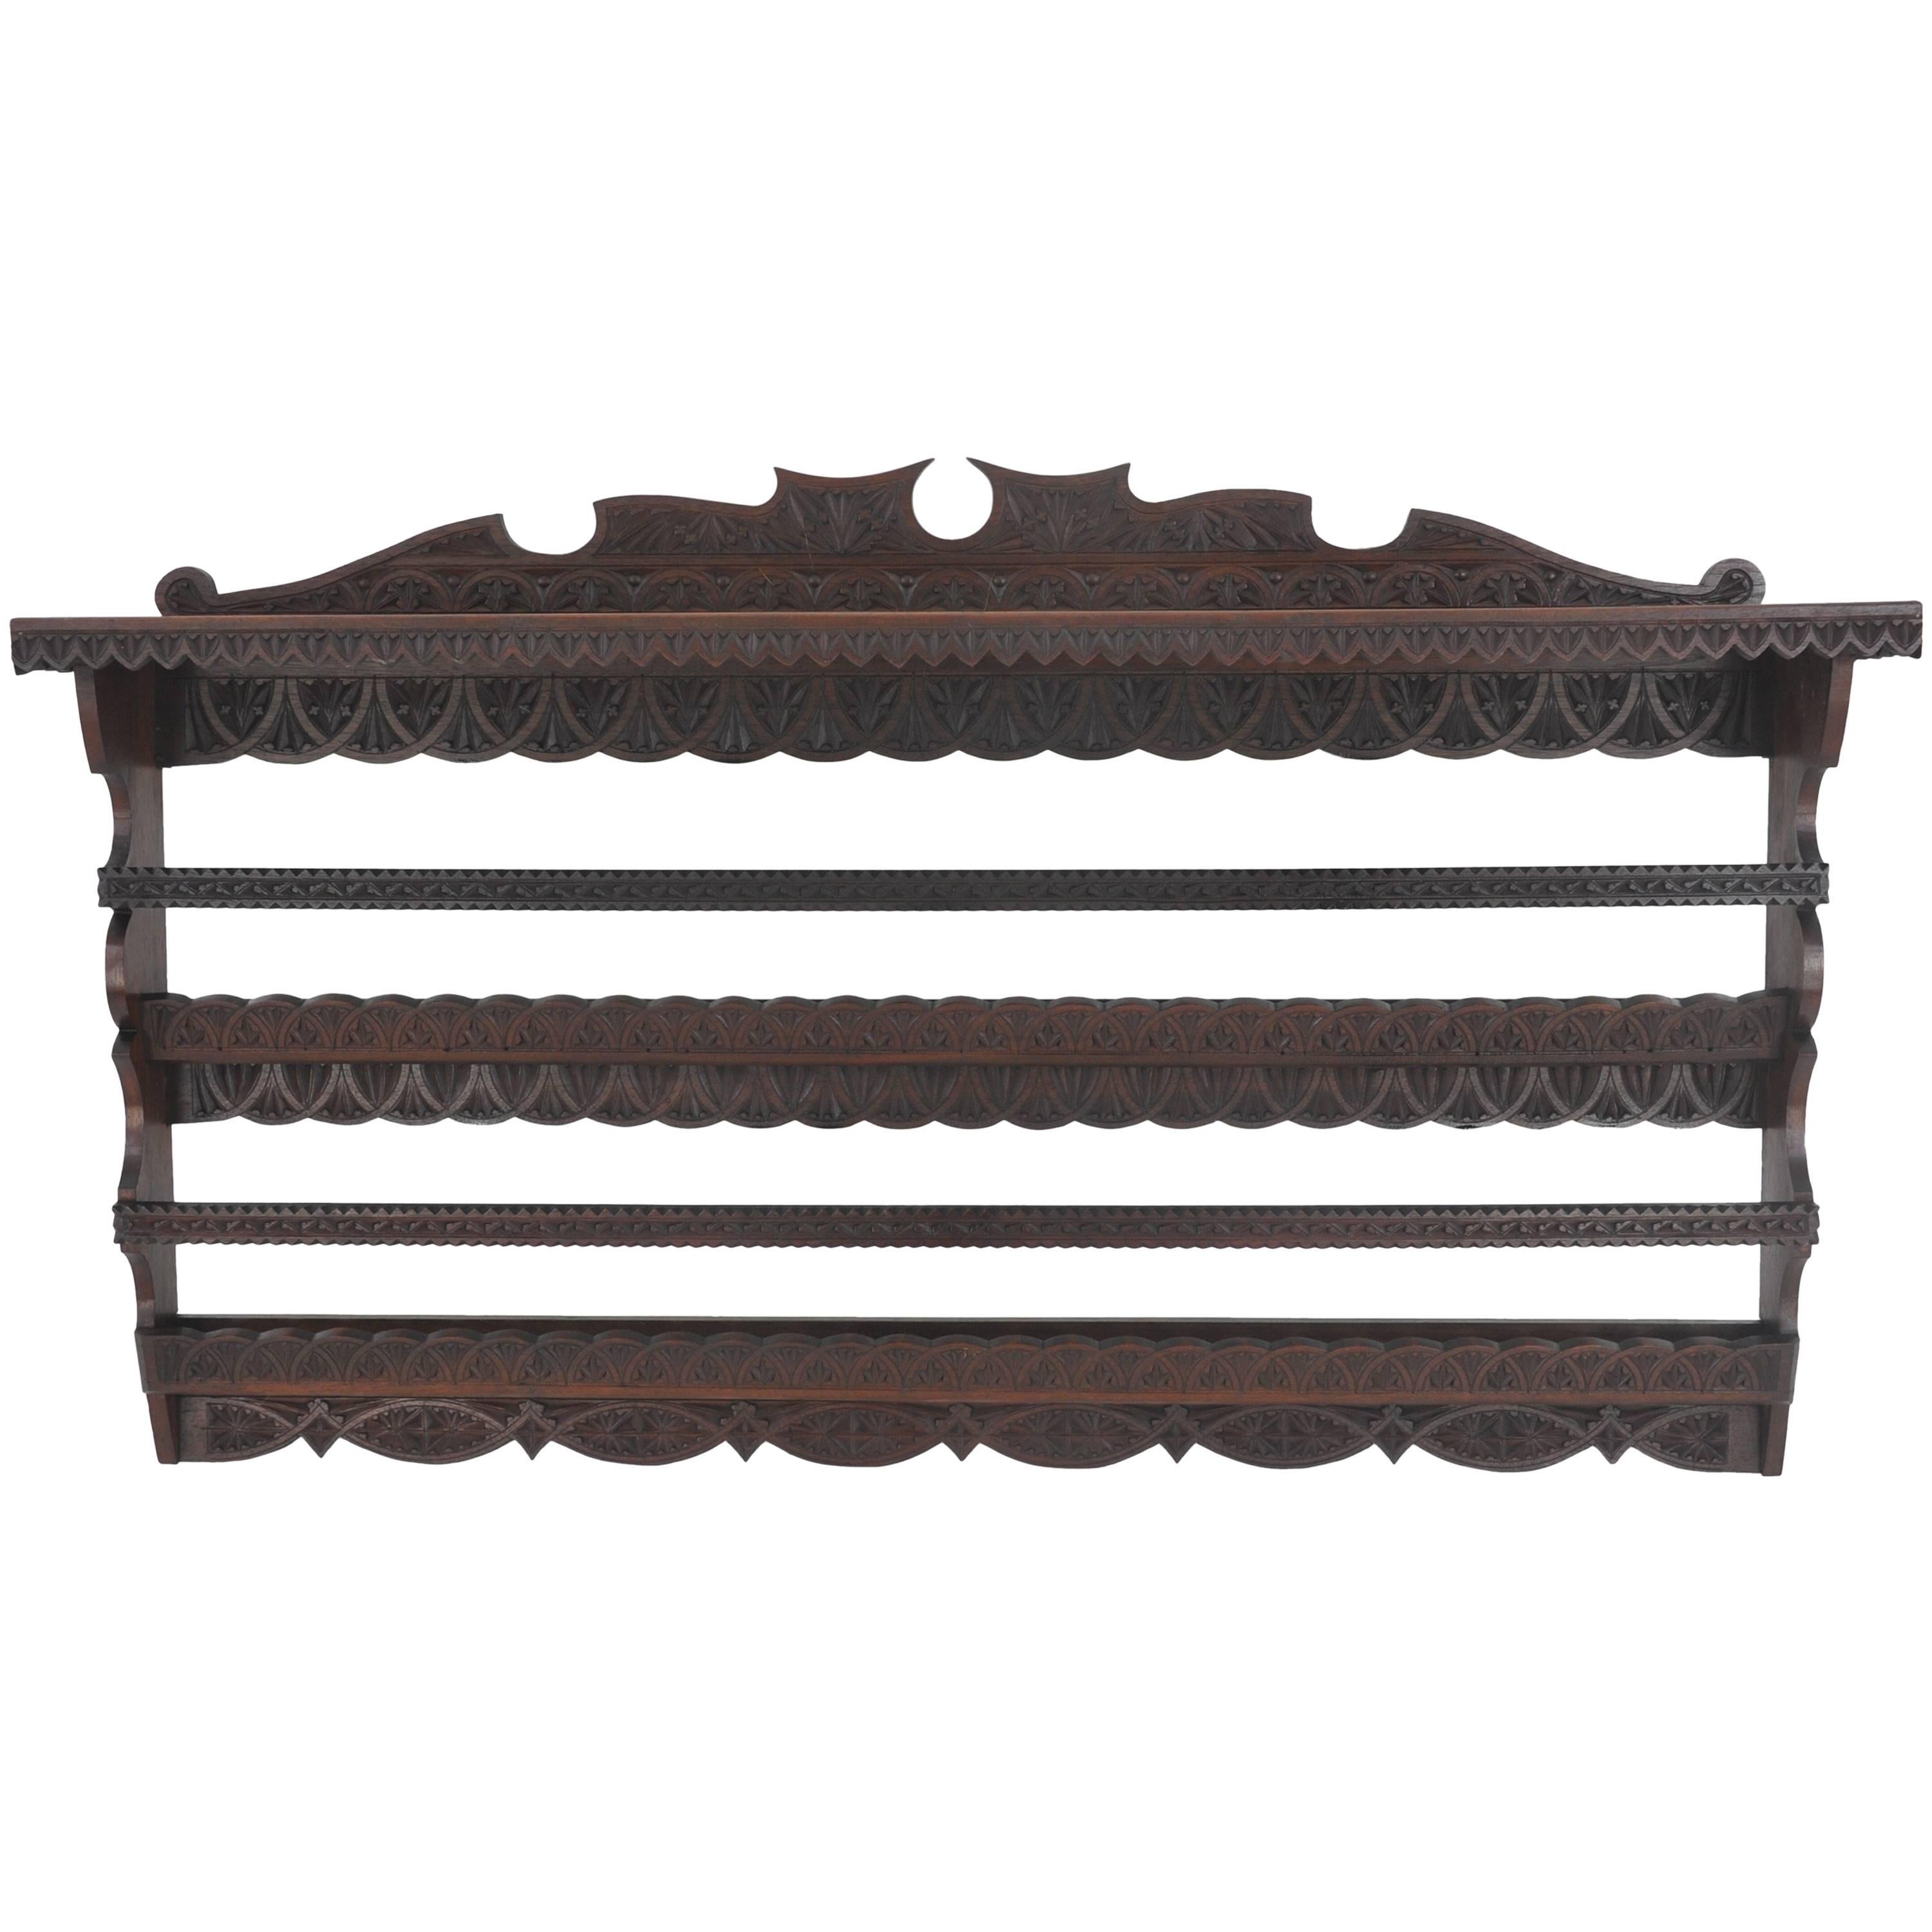 Antique Plate Rack, Solid Walnut, Victorian, Carved, Hanging Shelf B988A REDUCED